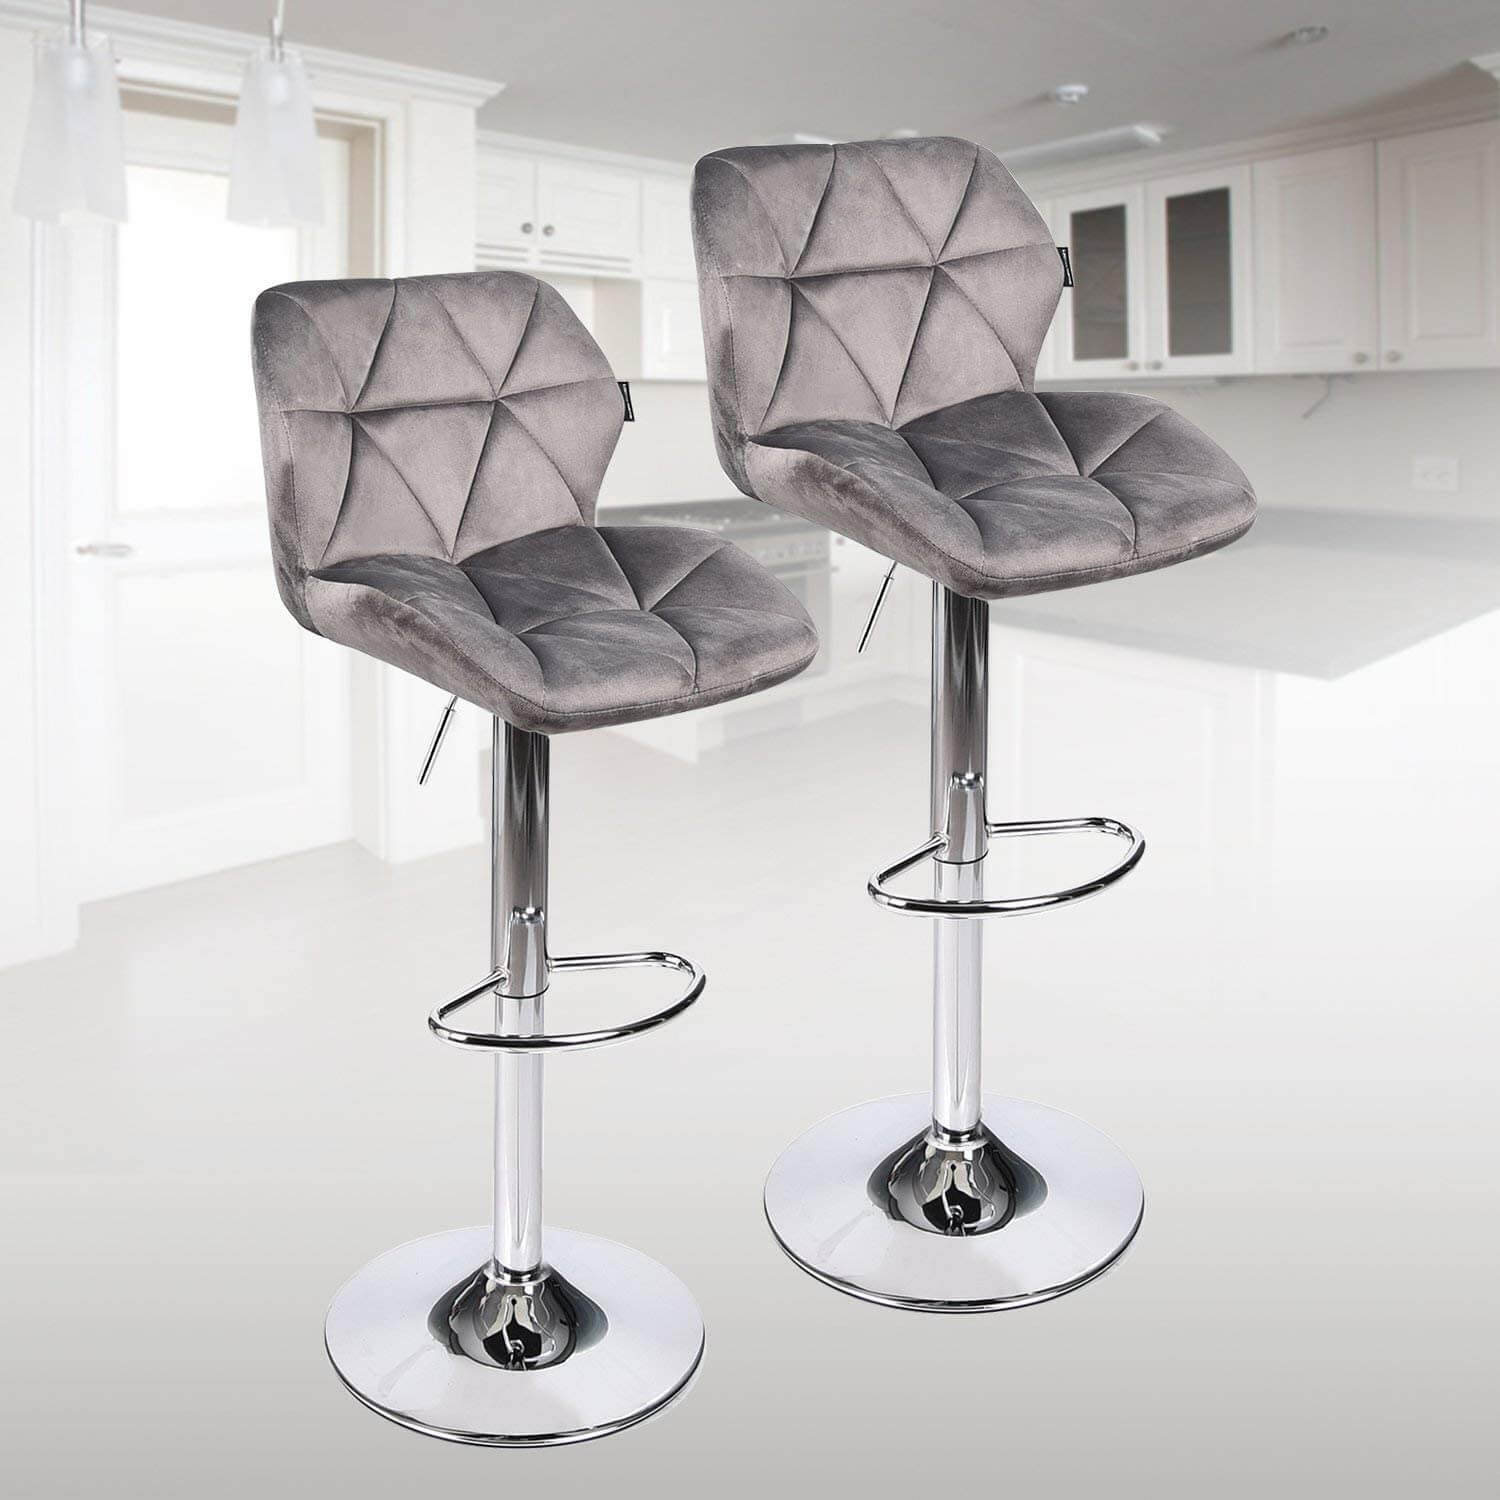 Elecwish Set of 2 Bar Stools OW005 is perfect for kitchen